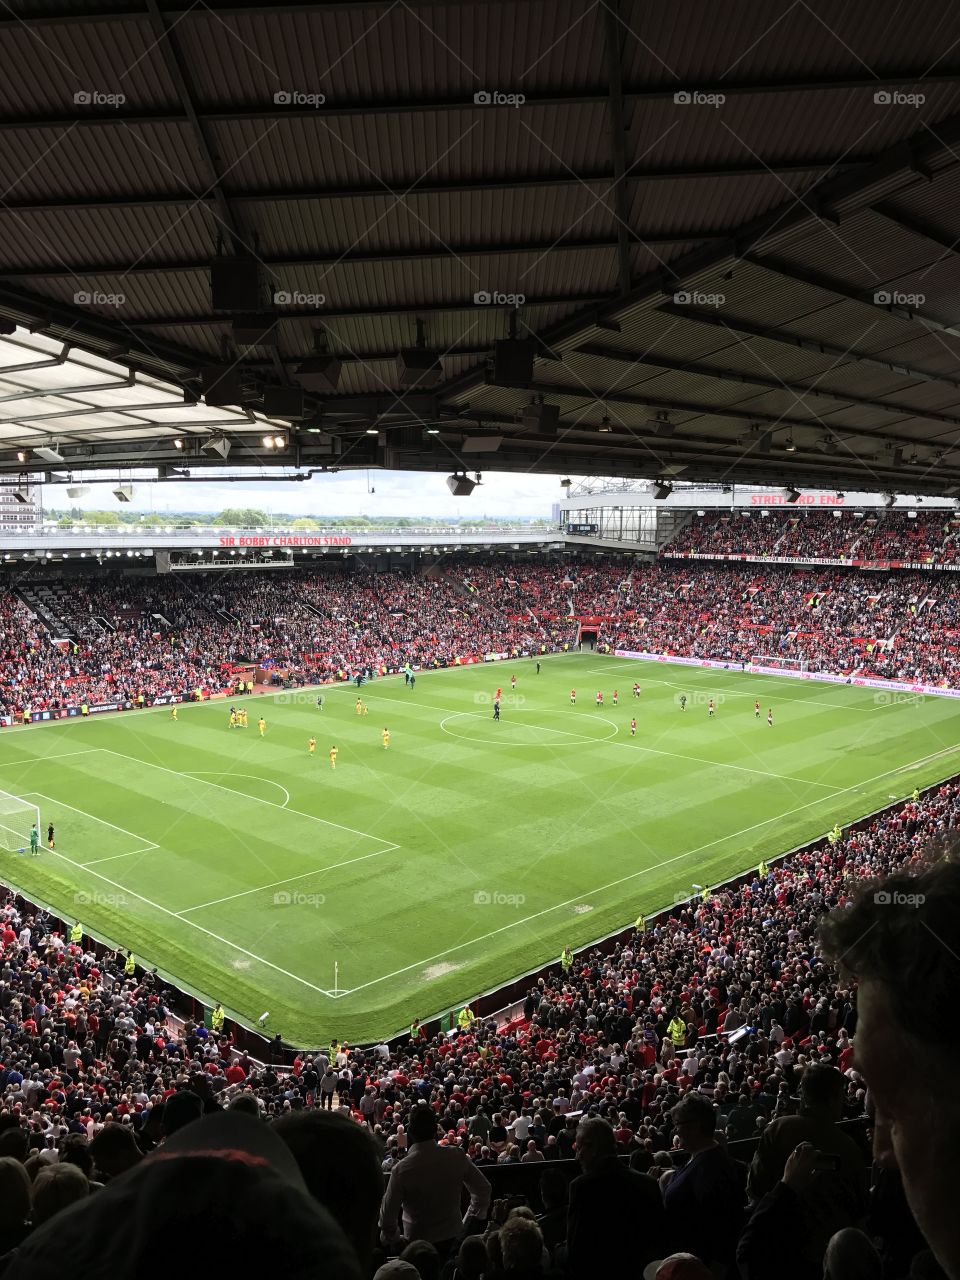 Manchester United football game!